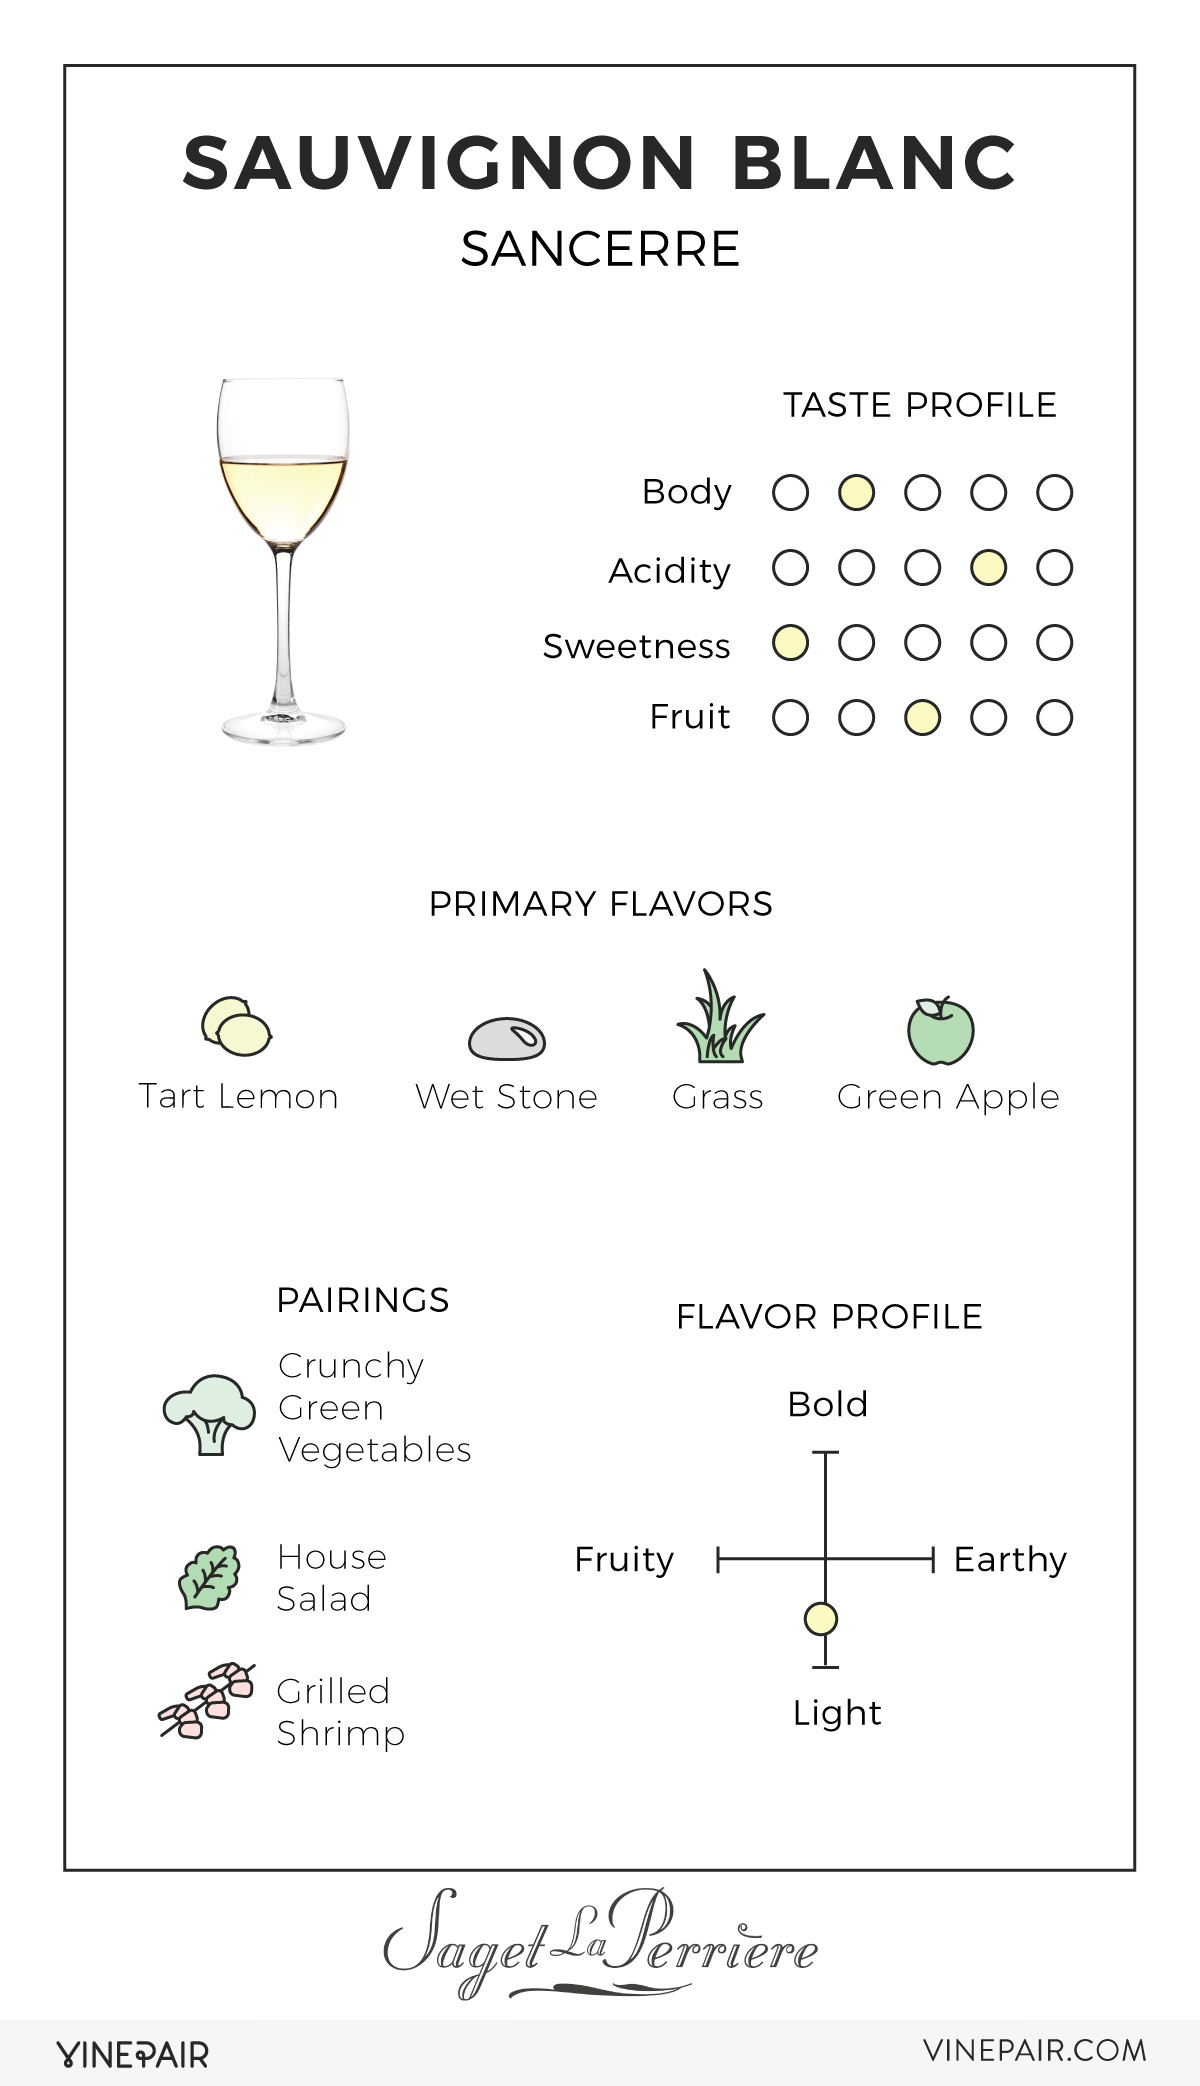 An Illustrated Guide to Sauvignon Blanc From Sancerre